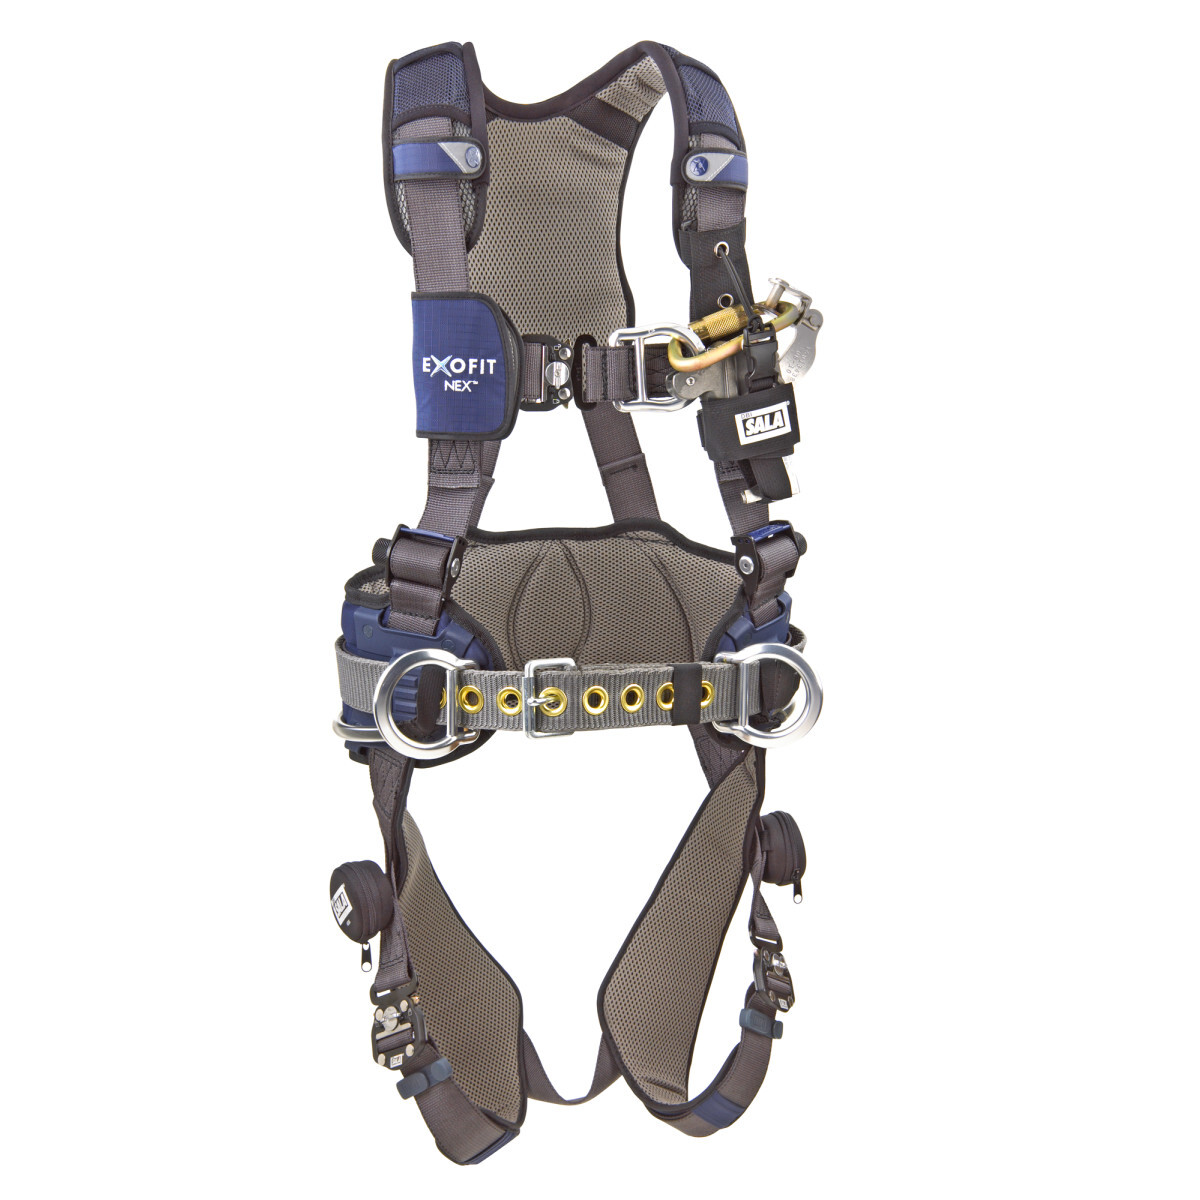 3M™ DBI-SALA® Medium ExoFit NEX™ Full Body/Vest Style Harness With Tech-Lite™ Aluminum Back And Front D-Ring, Duo-Lok™ Quick Con